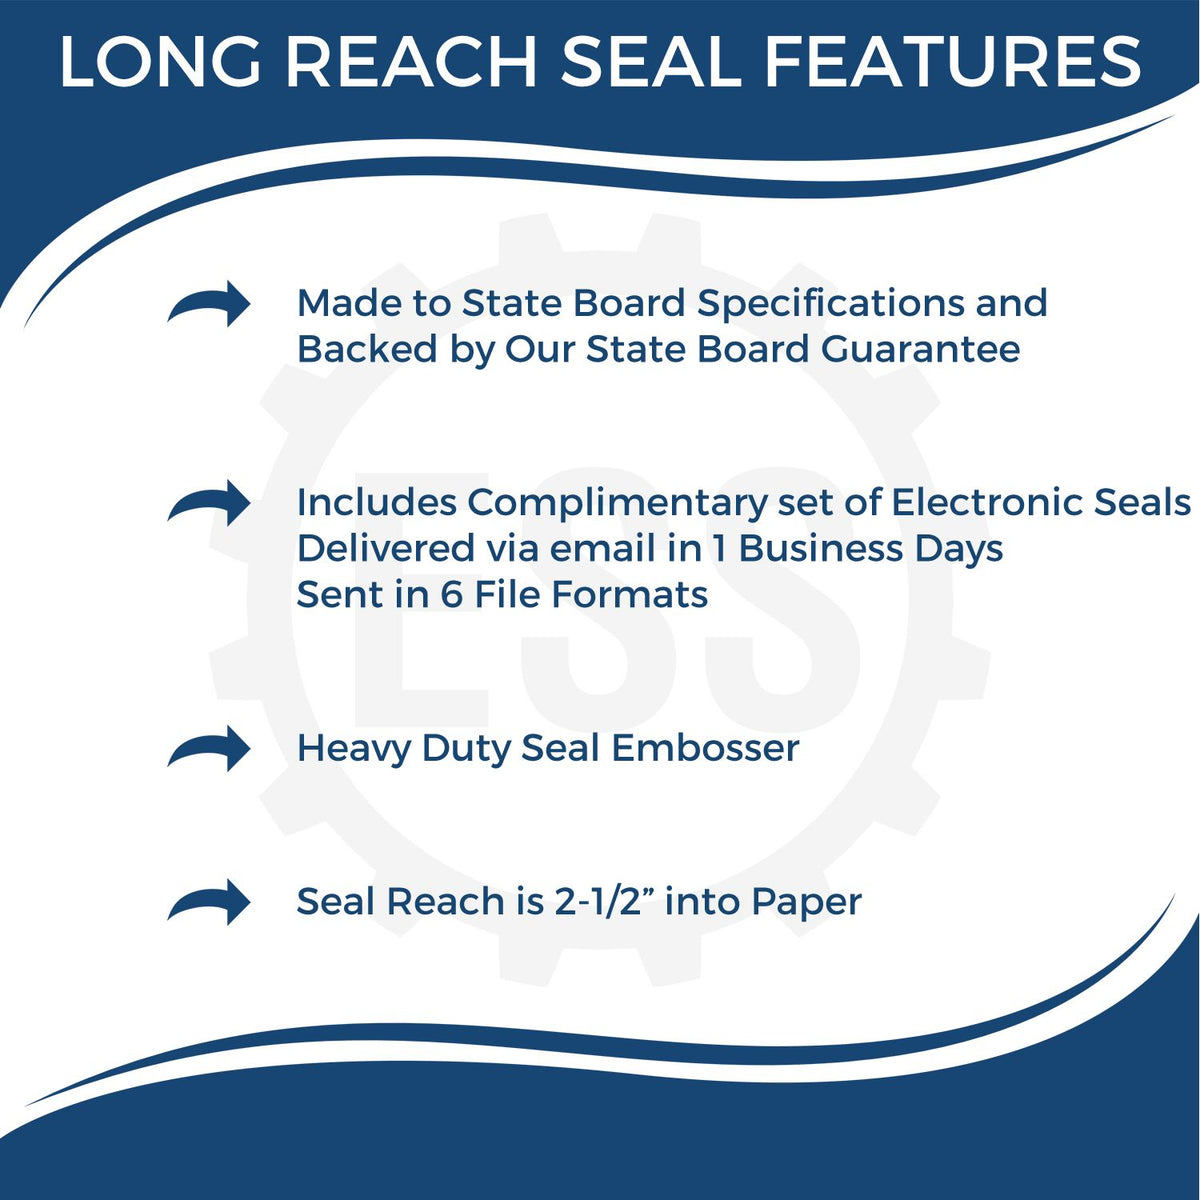 A picture of an infographic highlighting the selling points for the Long Reach Arizona Land Surveyor Seal